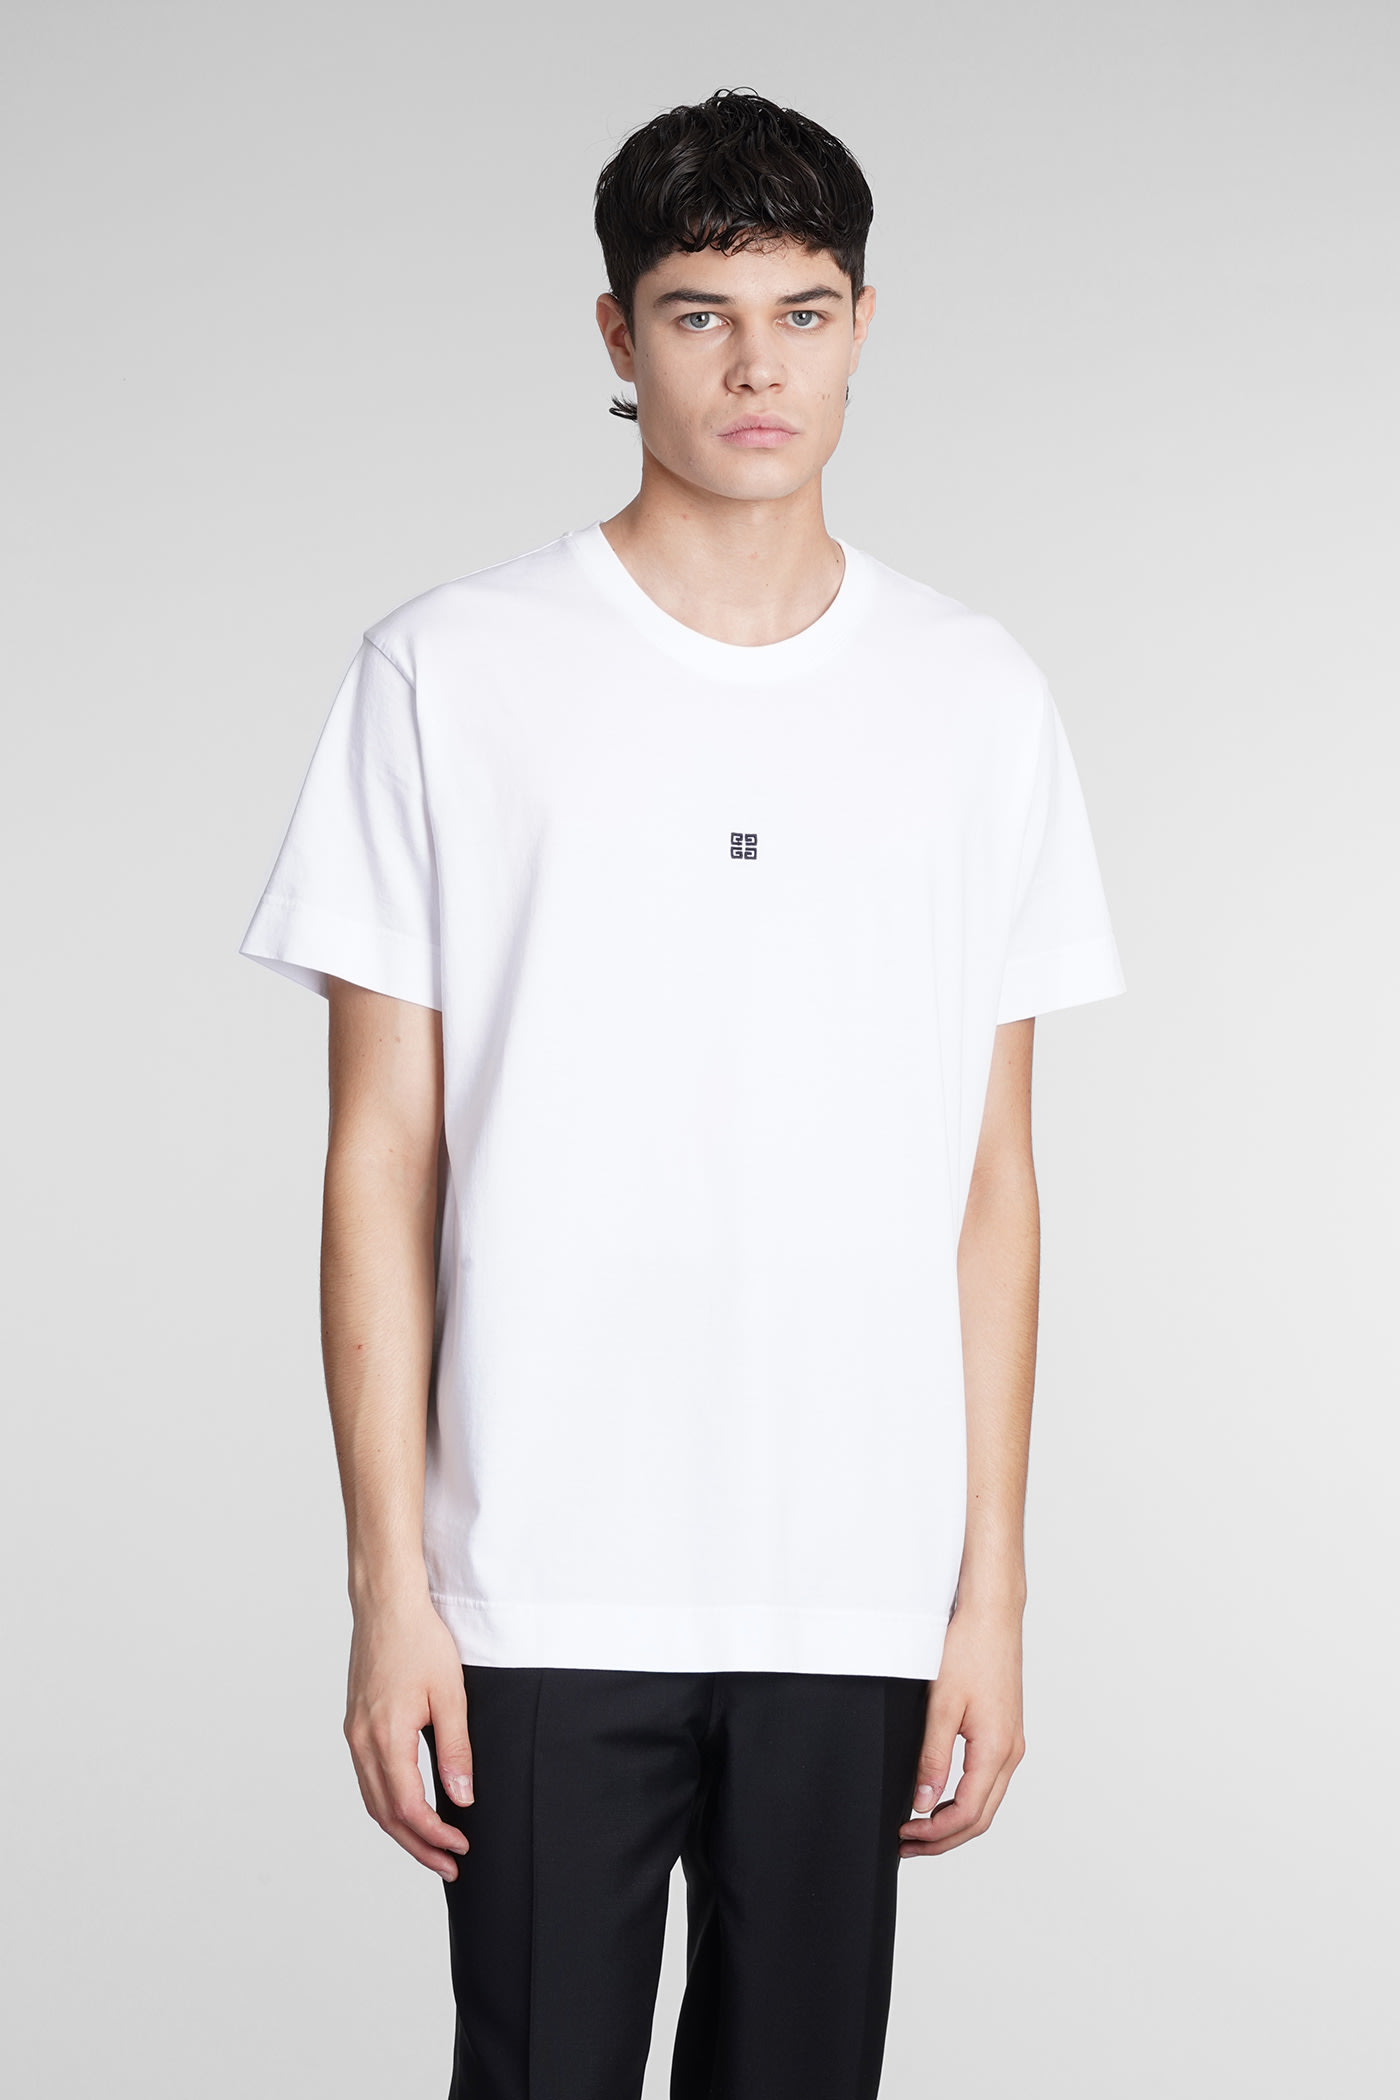 GIVENCHY T-SHIRT IN WHITE COTTON